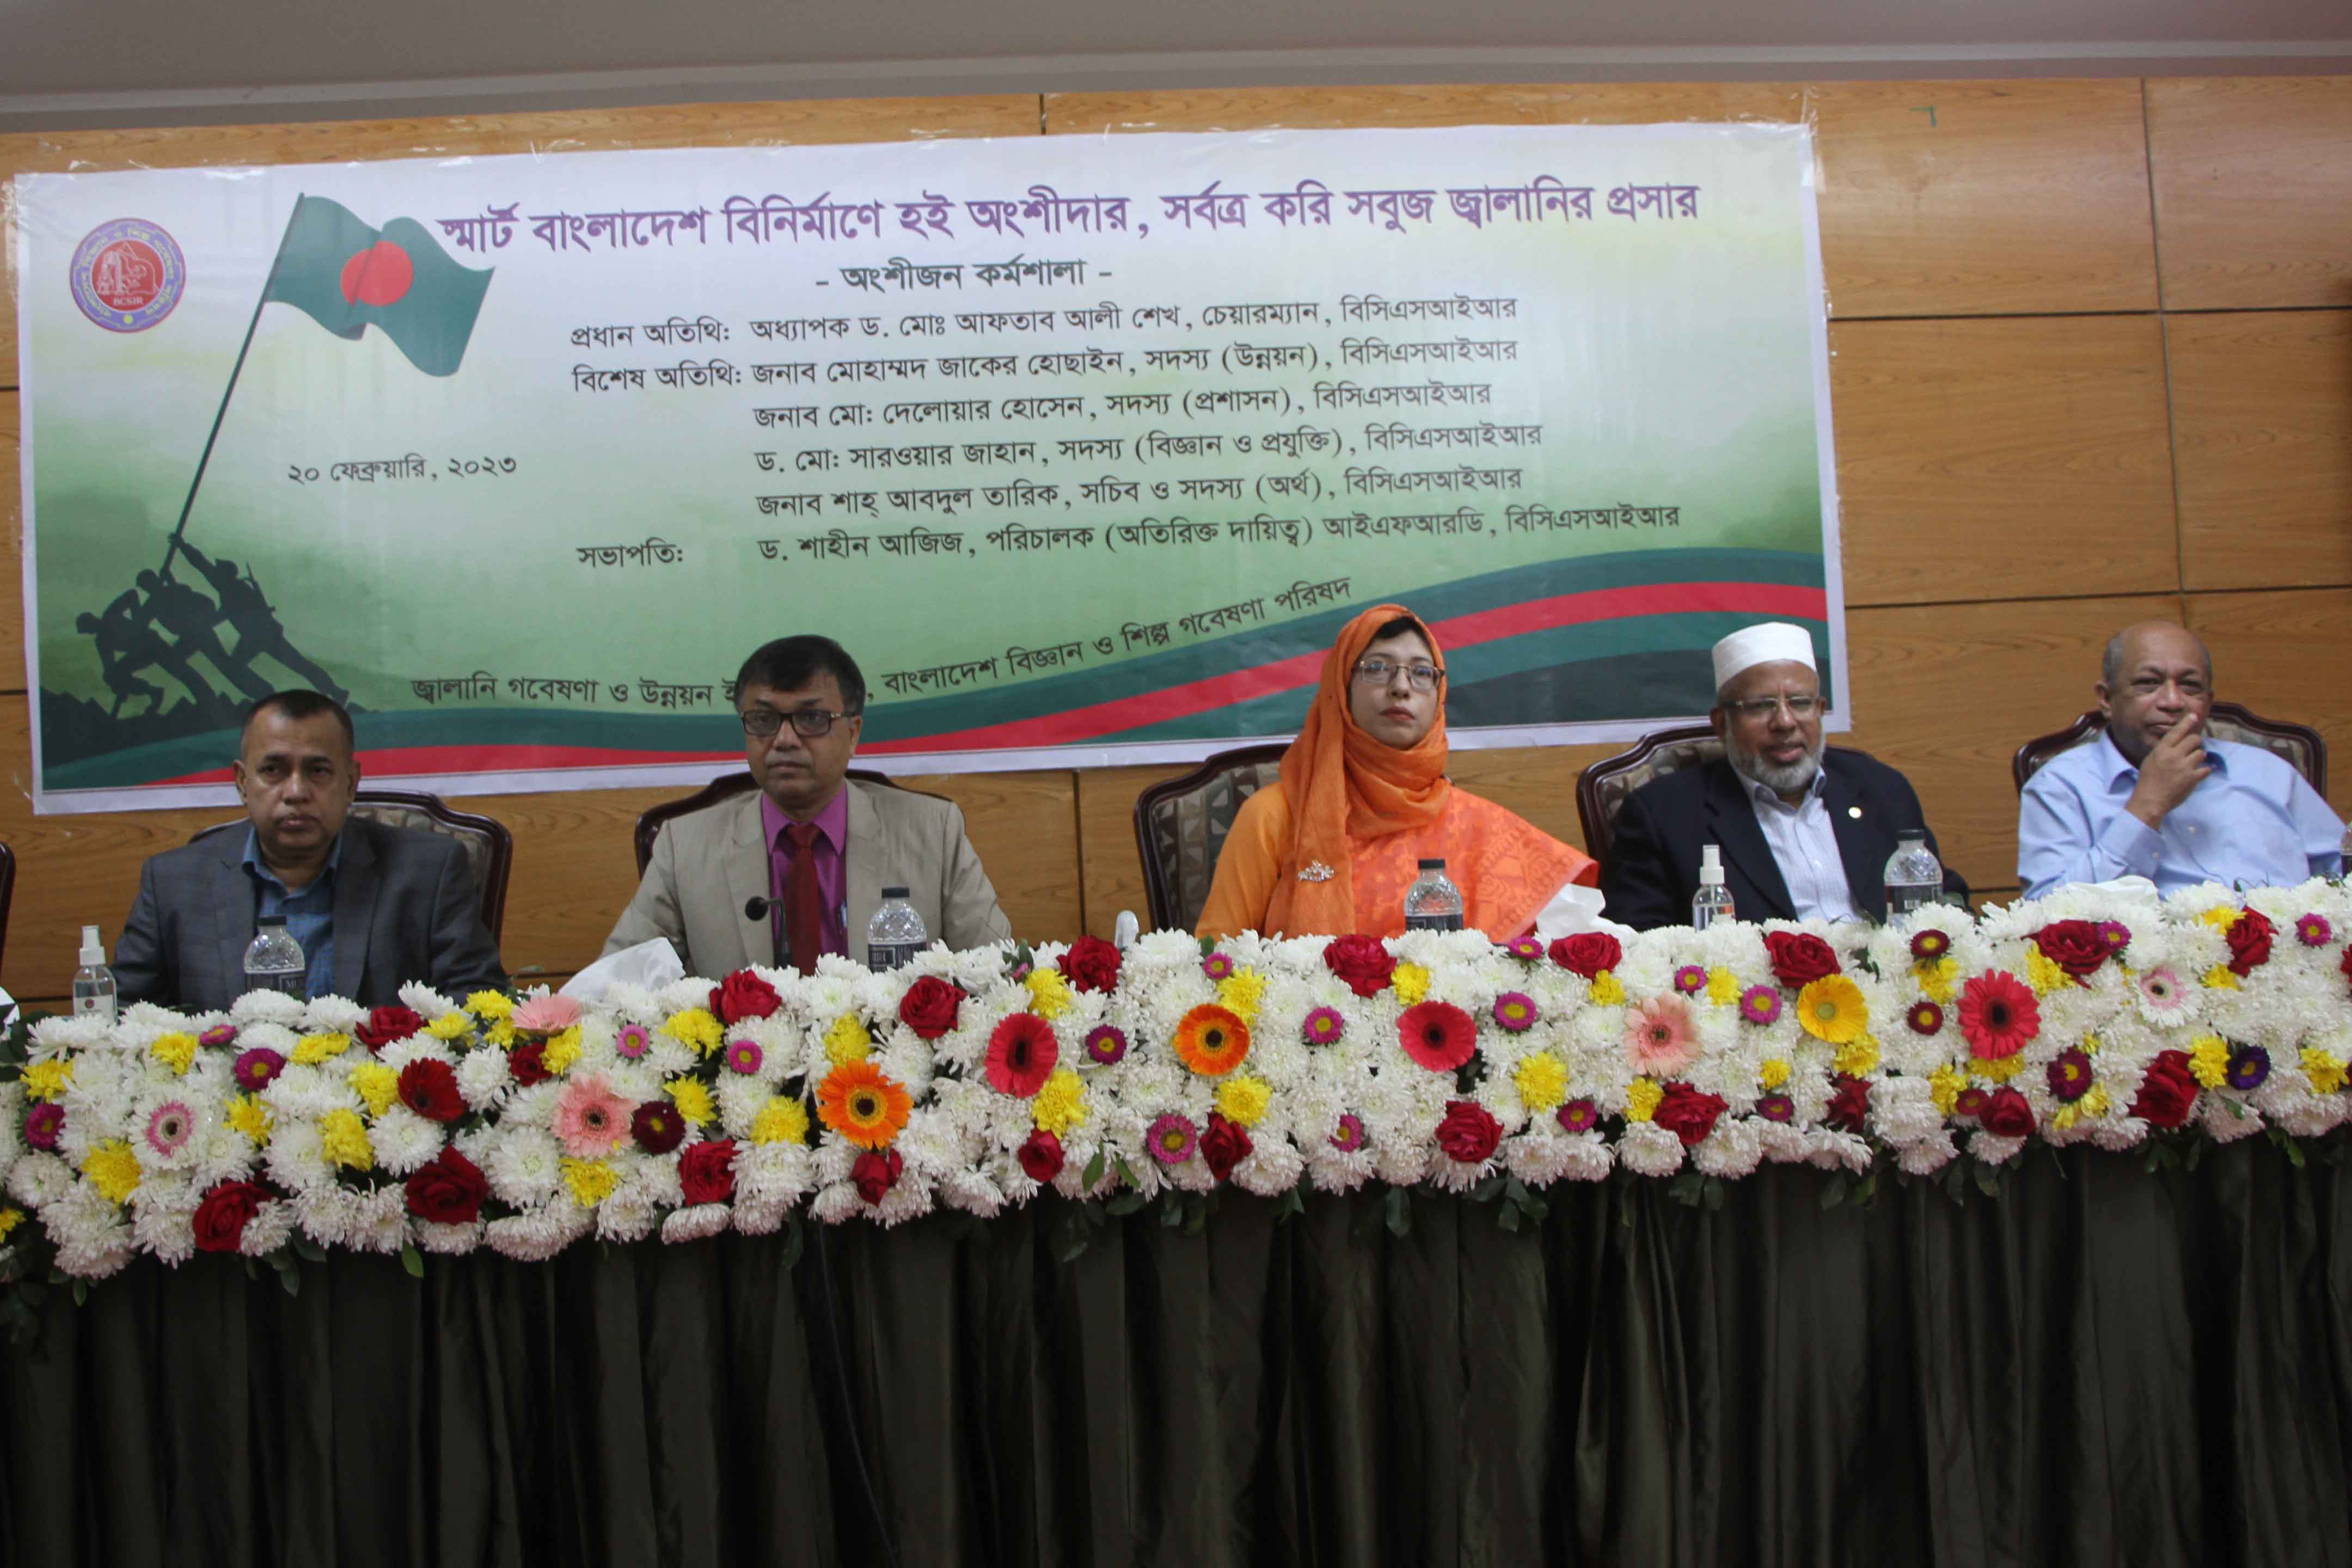 BECOME A PARTNER IN BUILDING SMART BANGLADESH. CONDUCTED STAKEHOLDER WORKSHOPS ON THE PROMOTION OF GREEN ENERGY EVERYWHERE